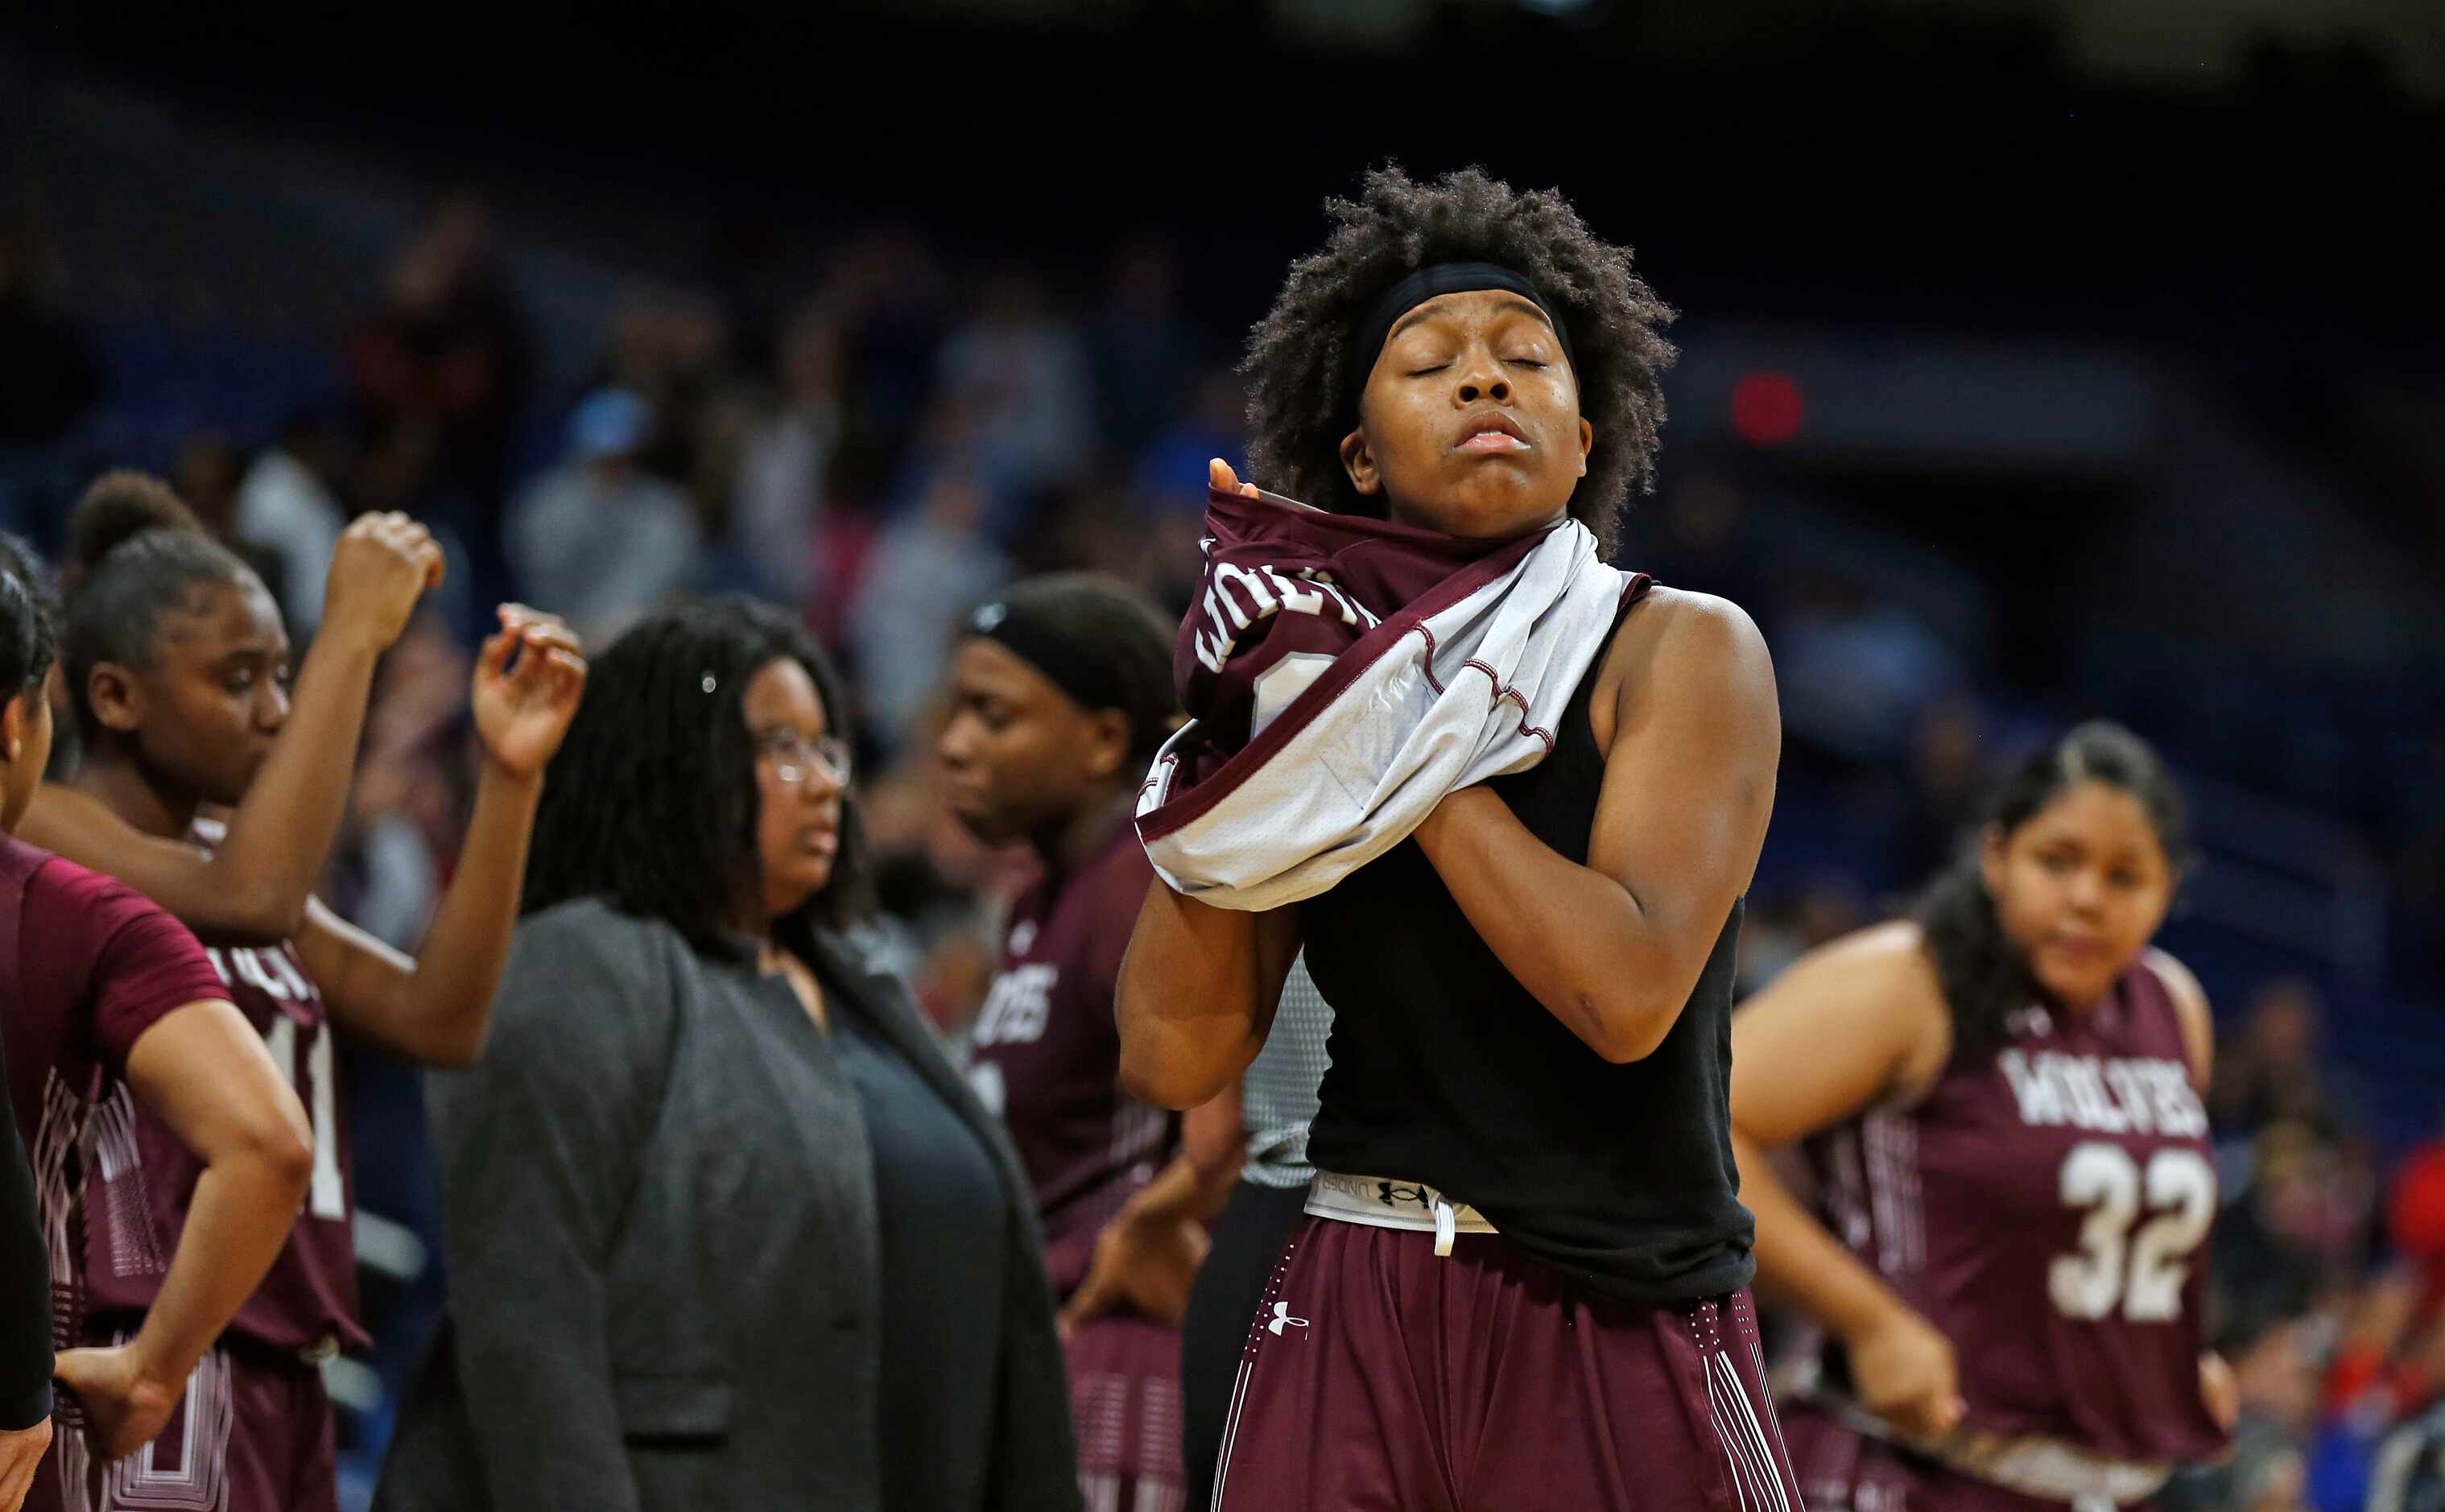 Mansfield Timberview guard Desiree Wooten #0 takes off her jersey at the end of the game in...